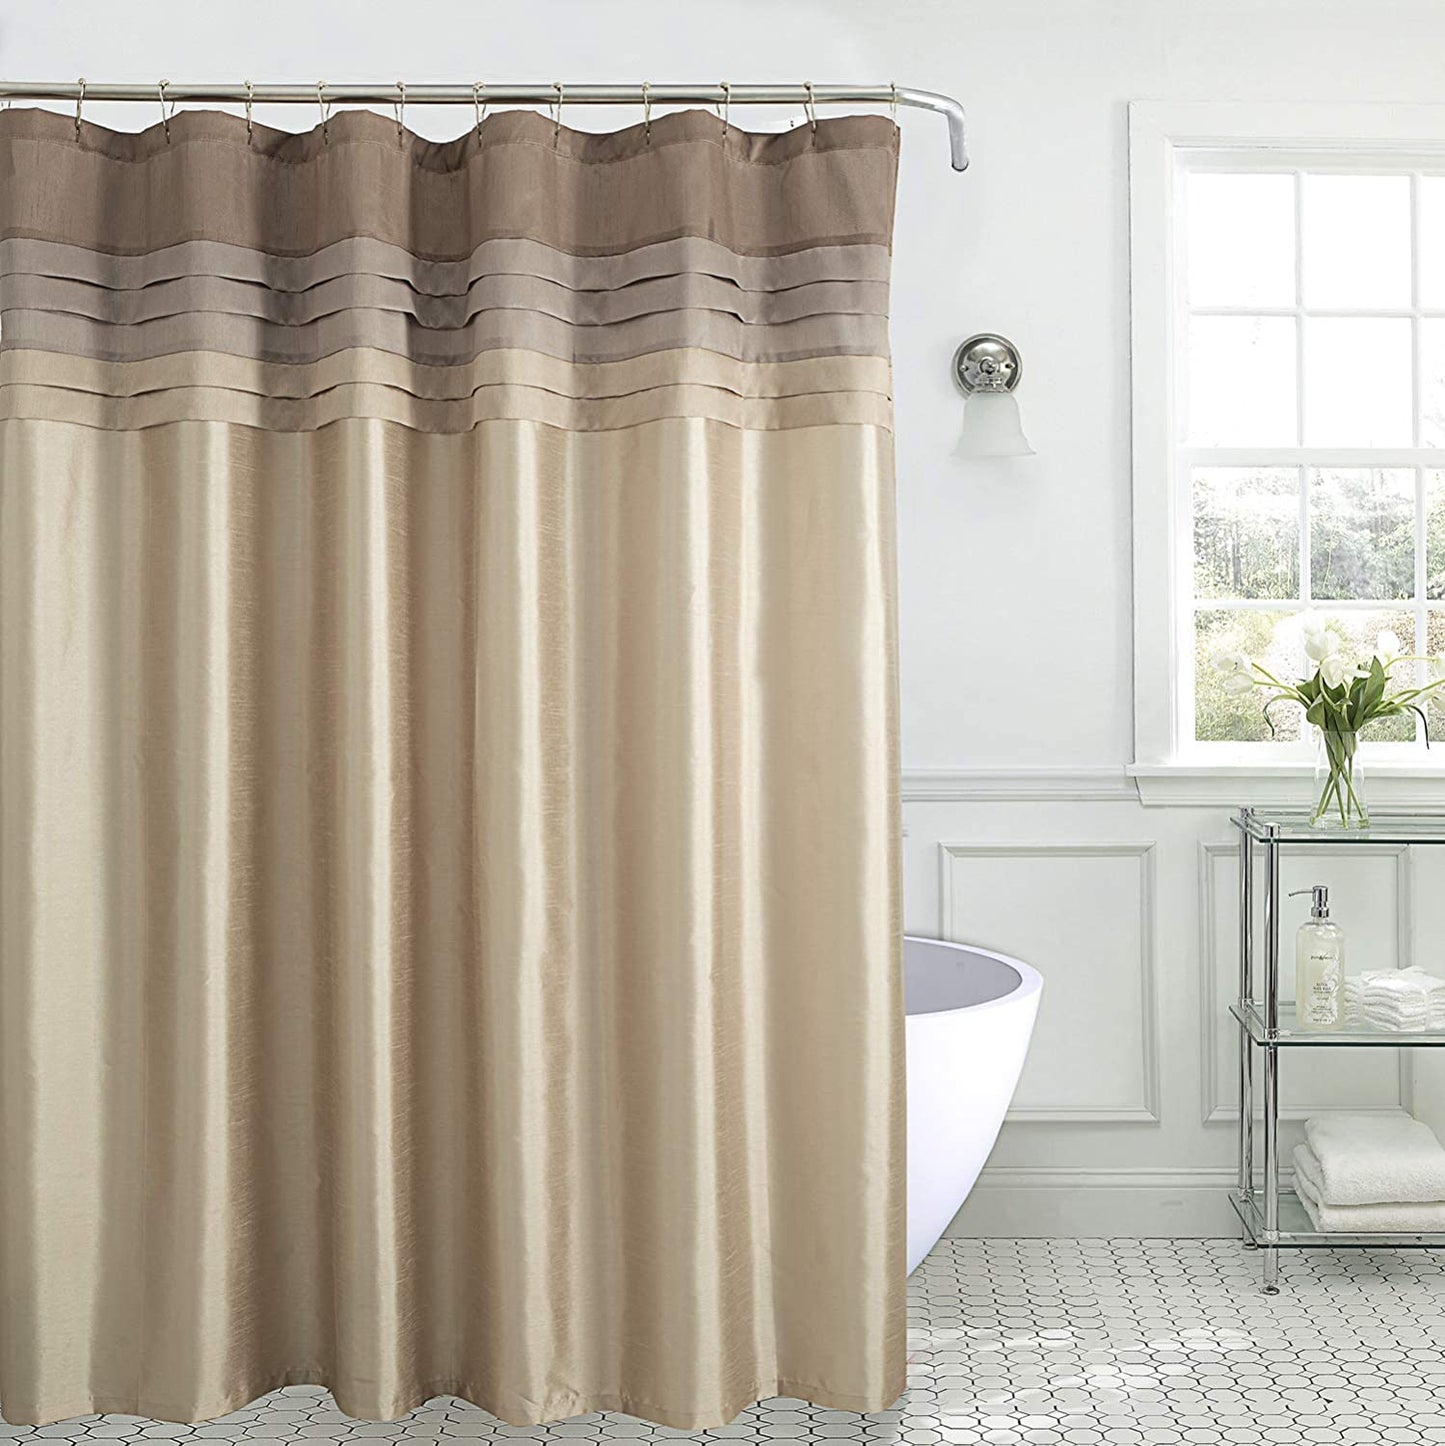 3-Color Stitching Polyester Grey Shower Curtain Without Hooks